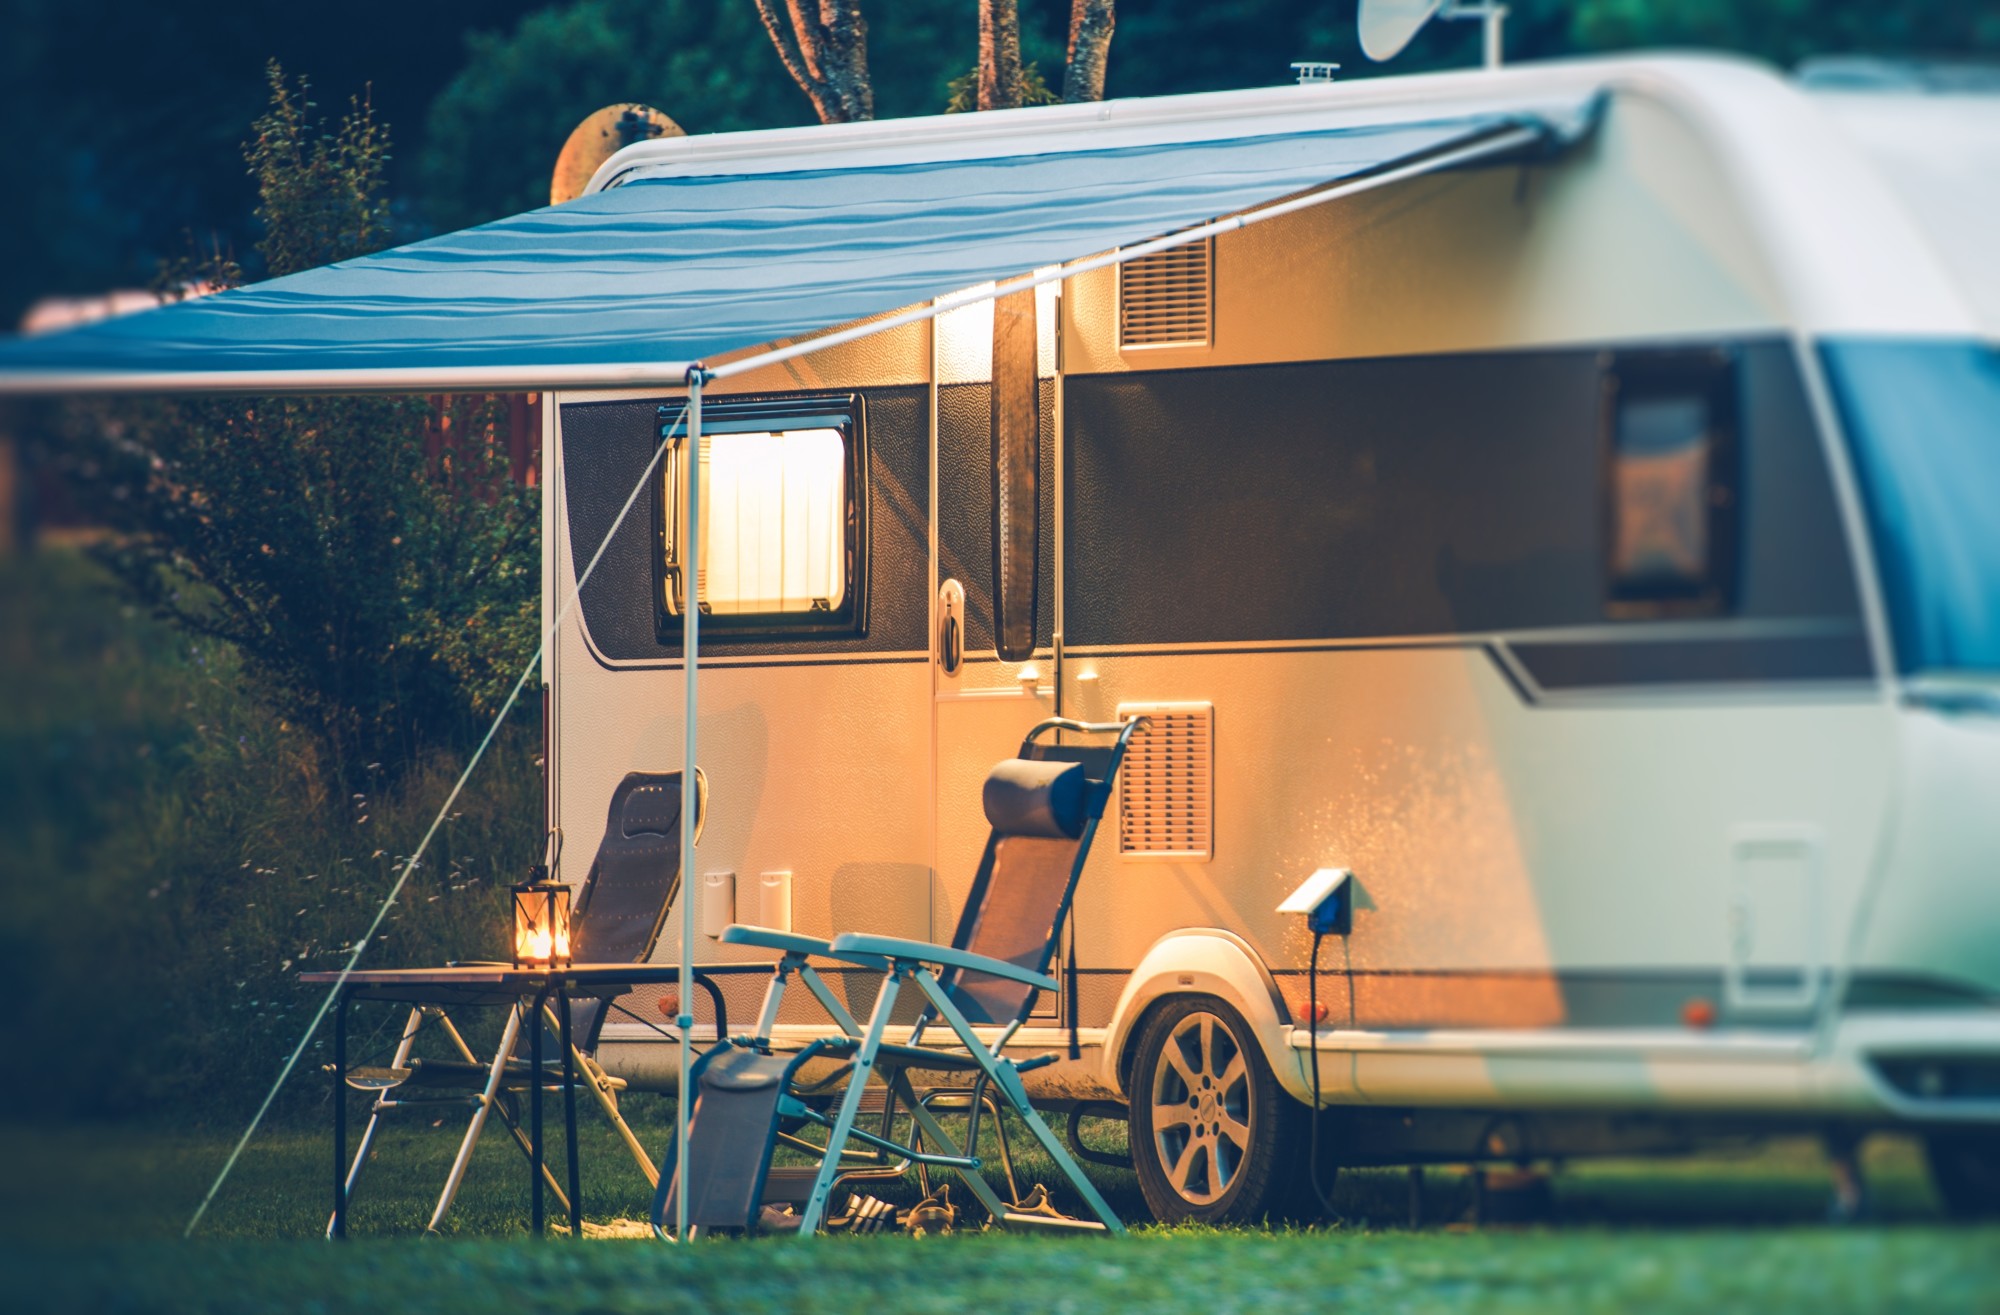 Motorhomes Used for Sale: 3 Things to Consider When Buying a Motorhome